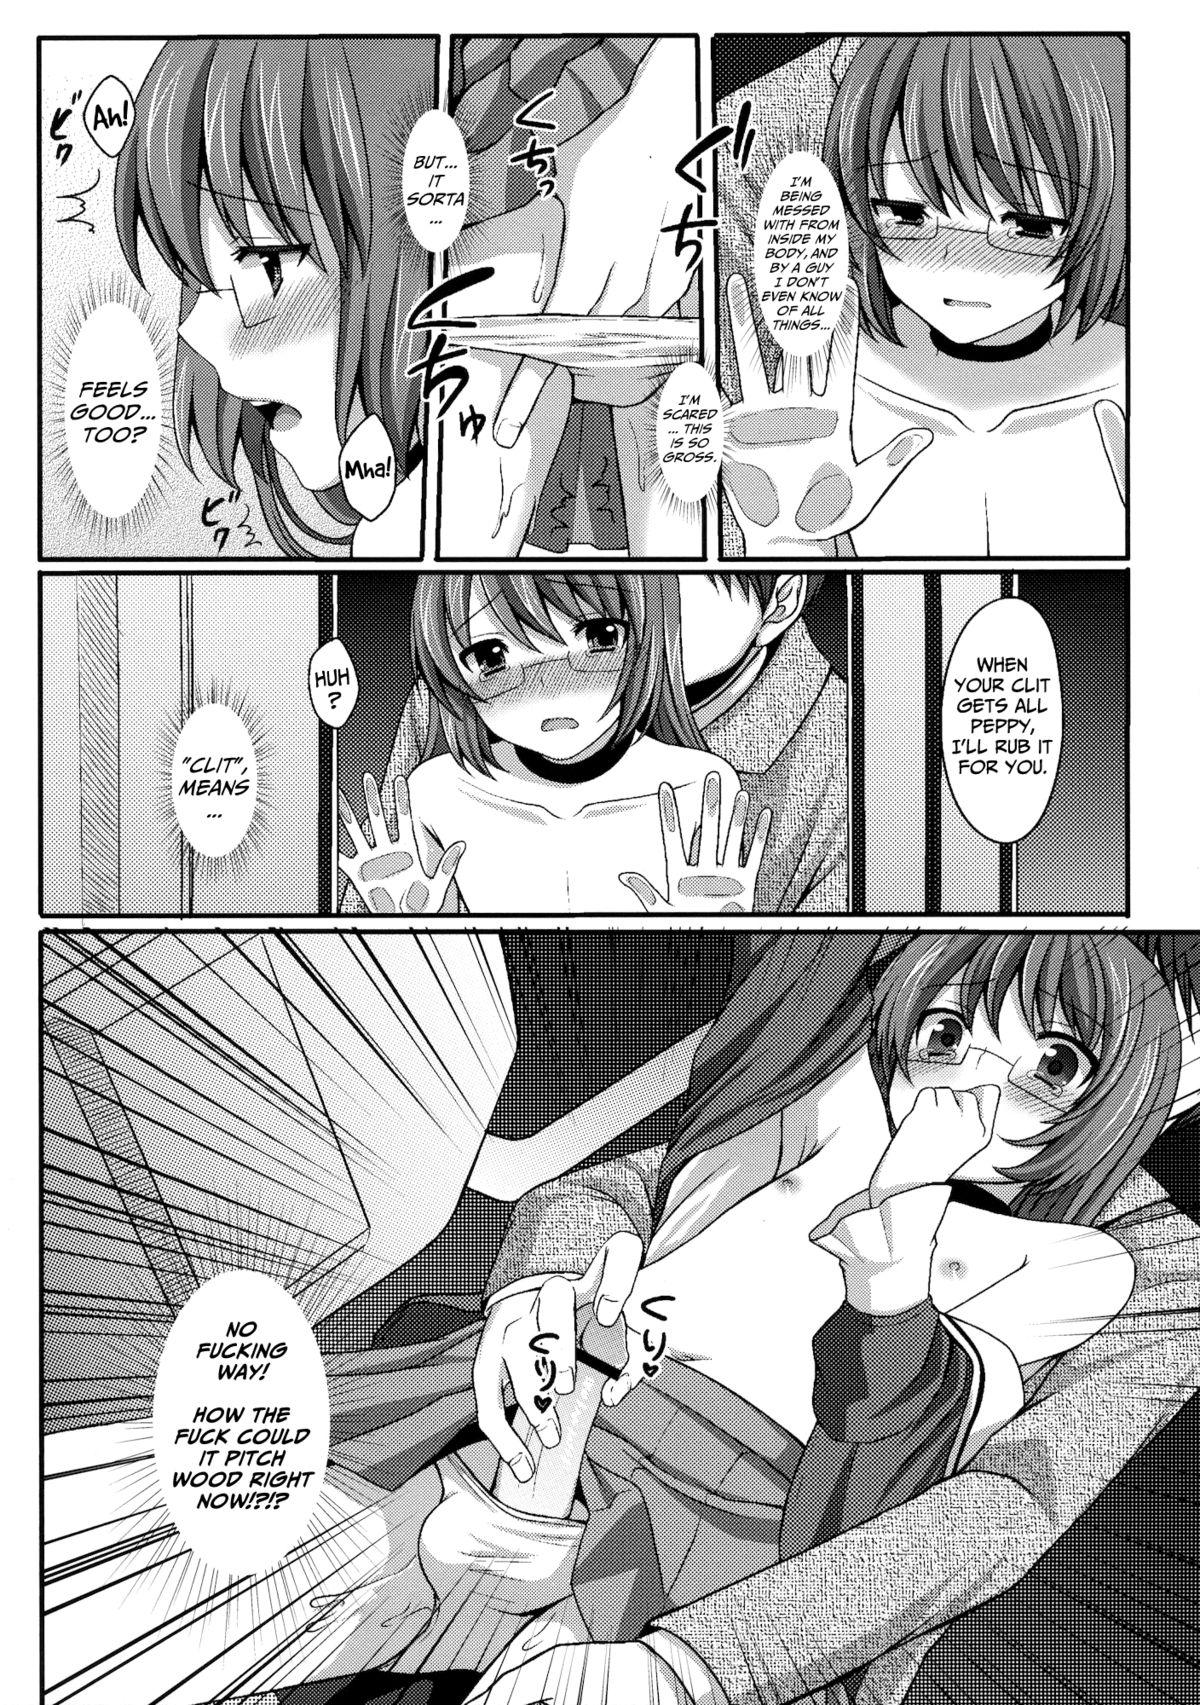 Deutsche Kami-sama o Chikan | God & Molester - The world god only knows Girl Sucking Dick - Page 9